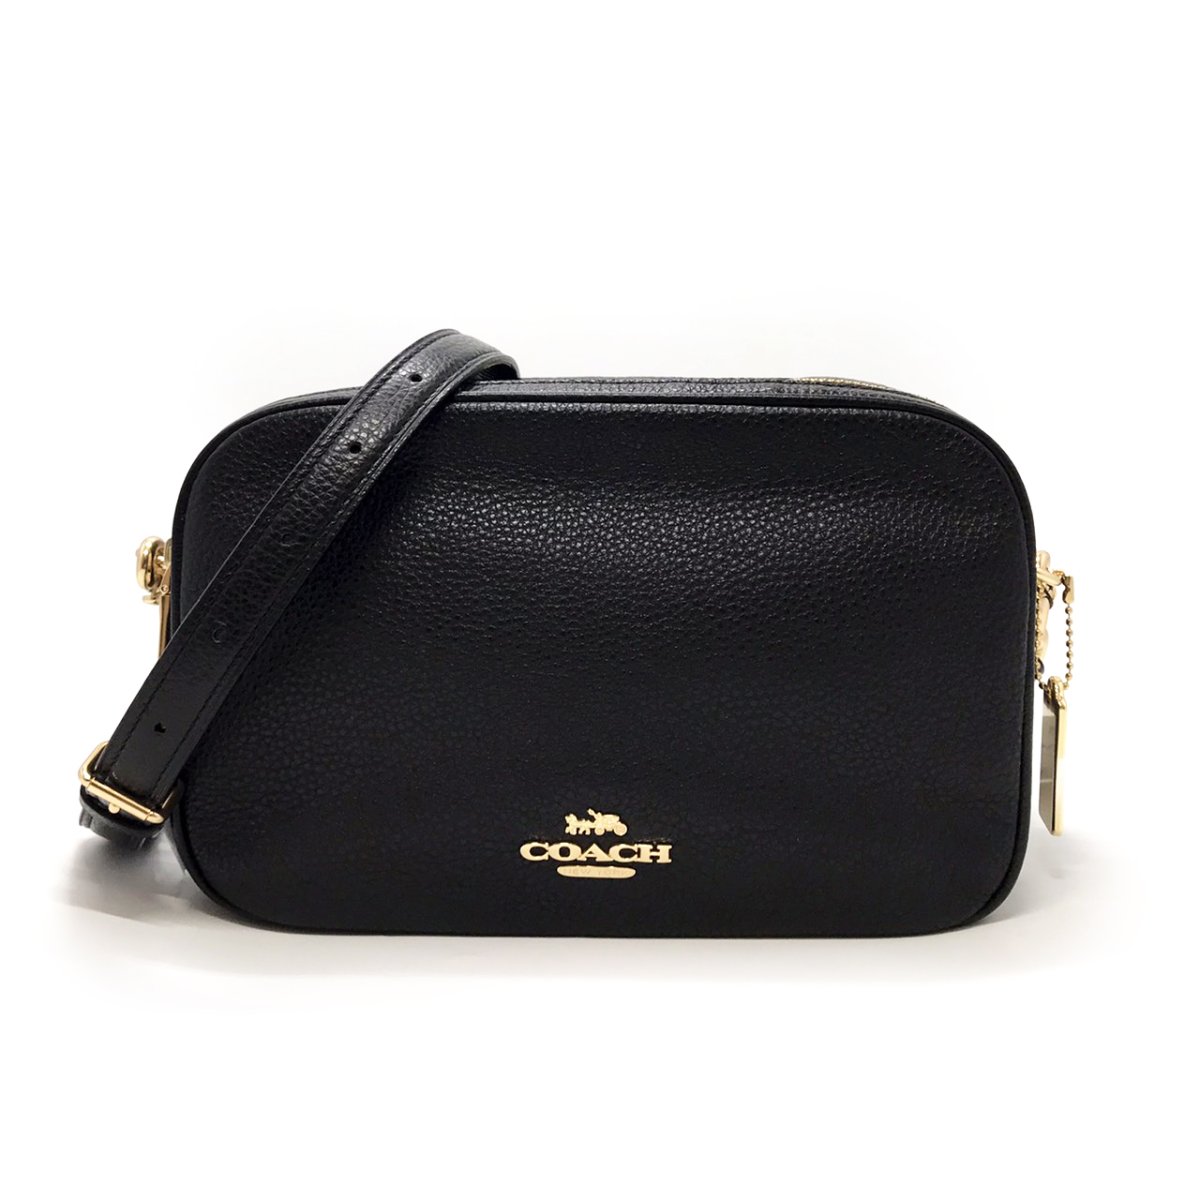 New Coach Jes Crossbody Bag Large in Black Leather GHW - Moppetbrandname